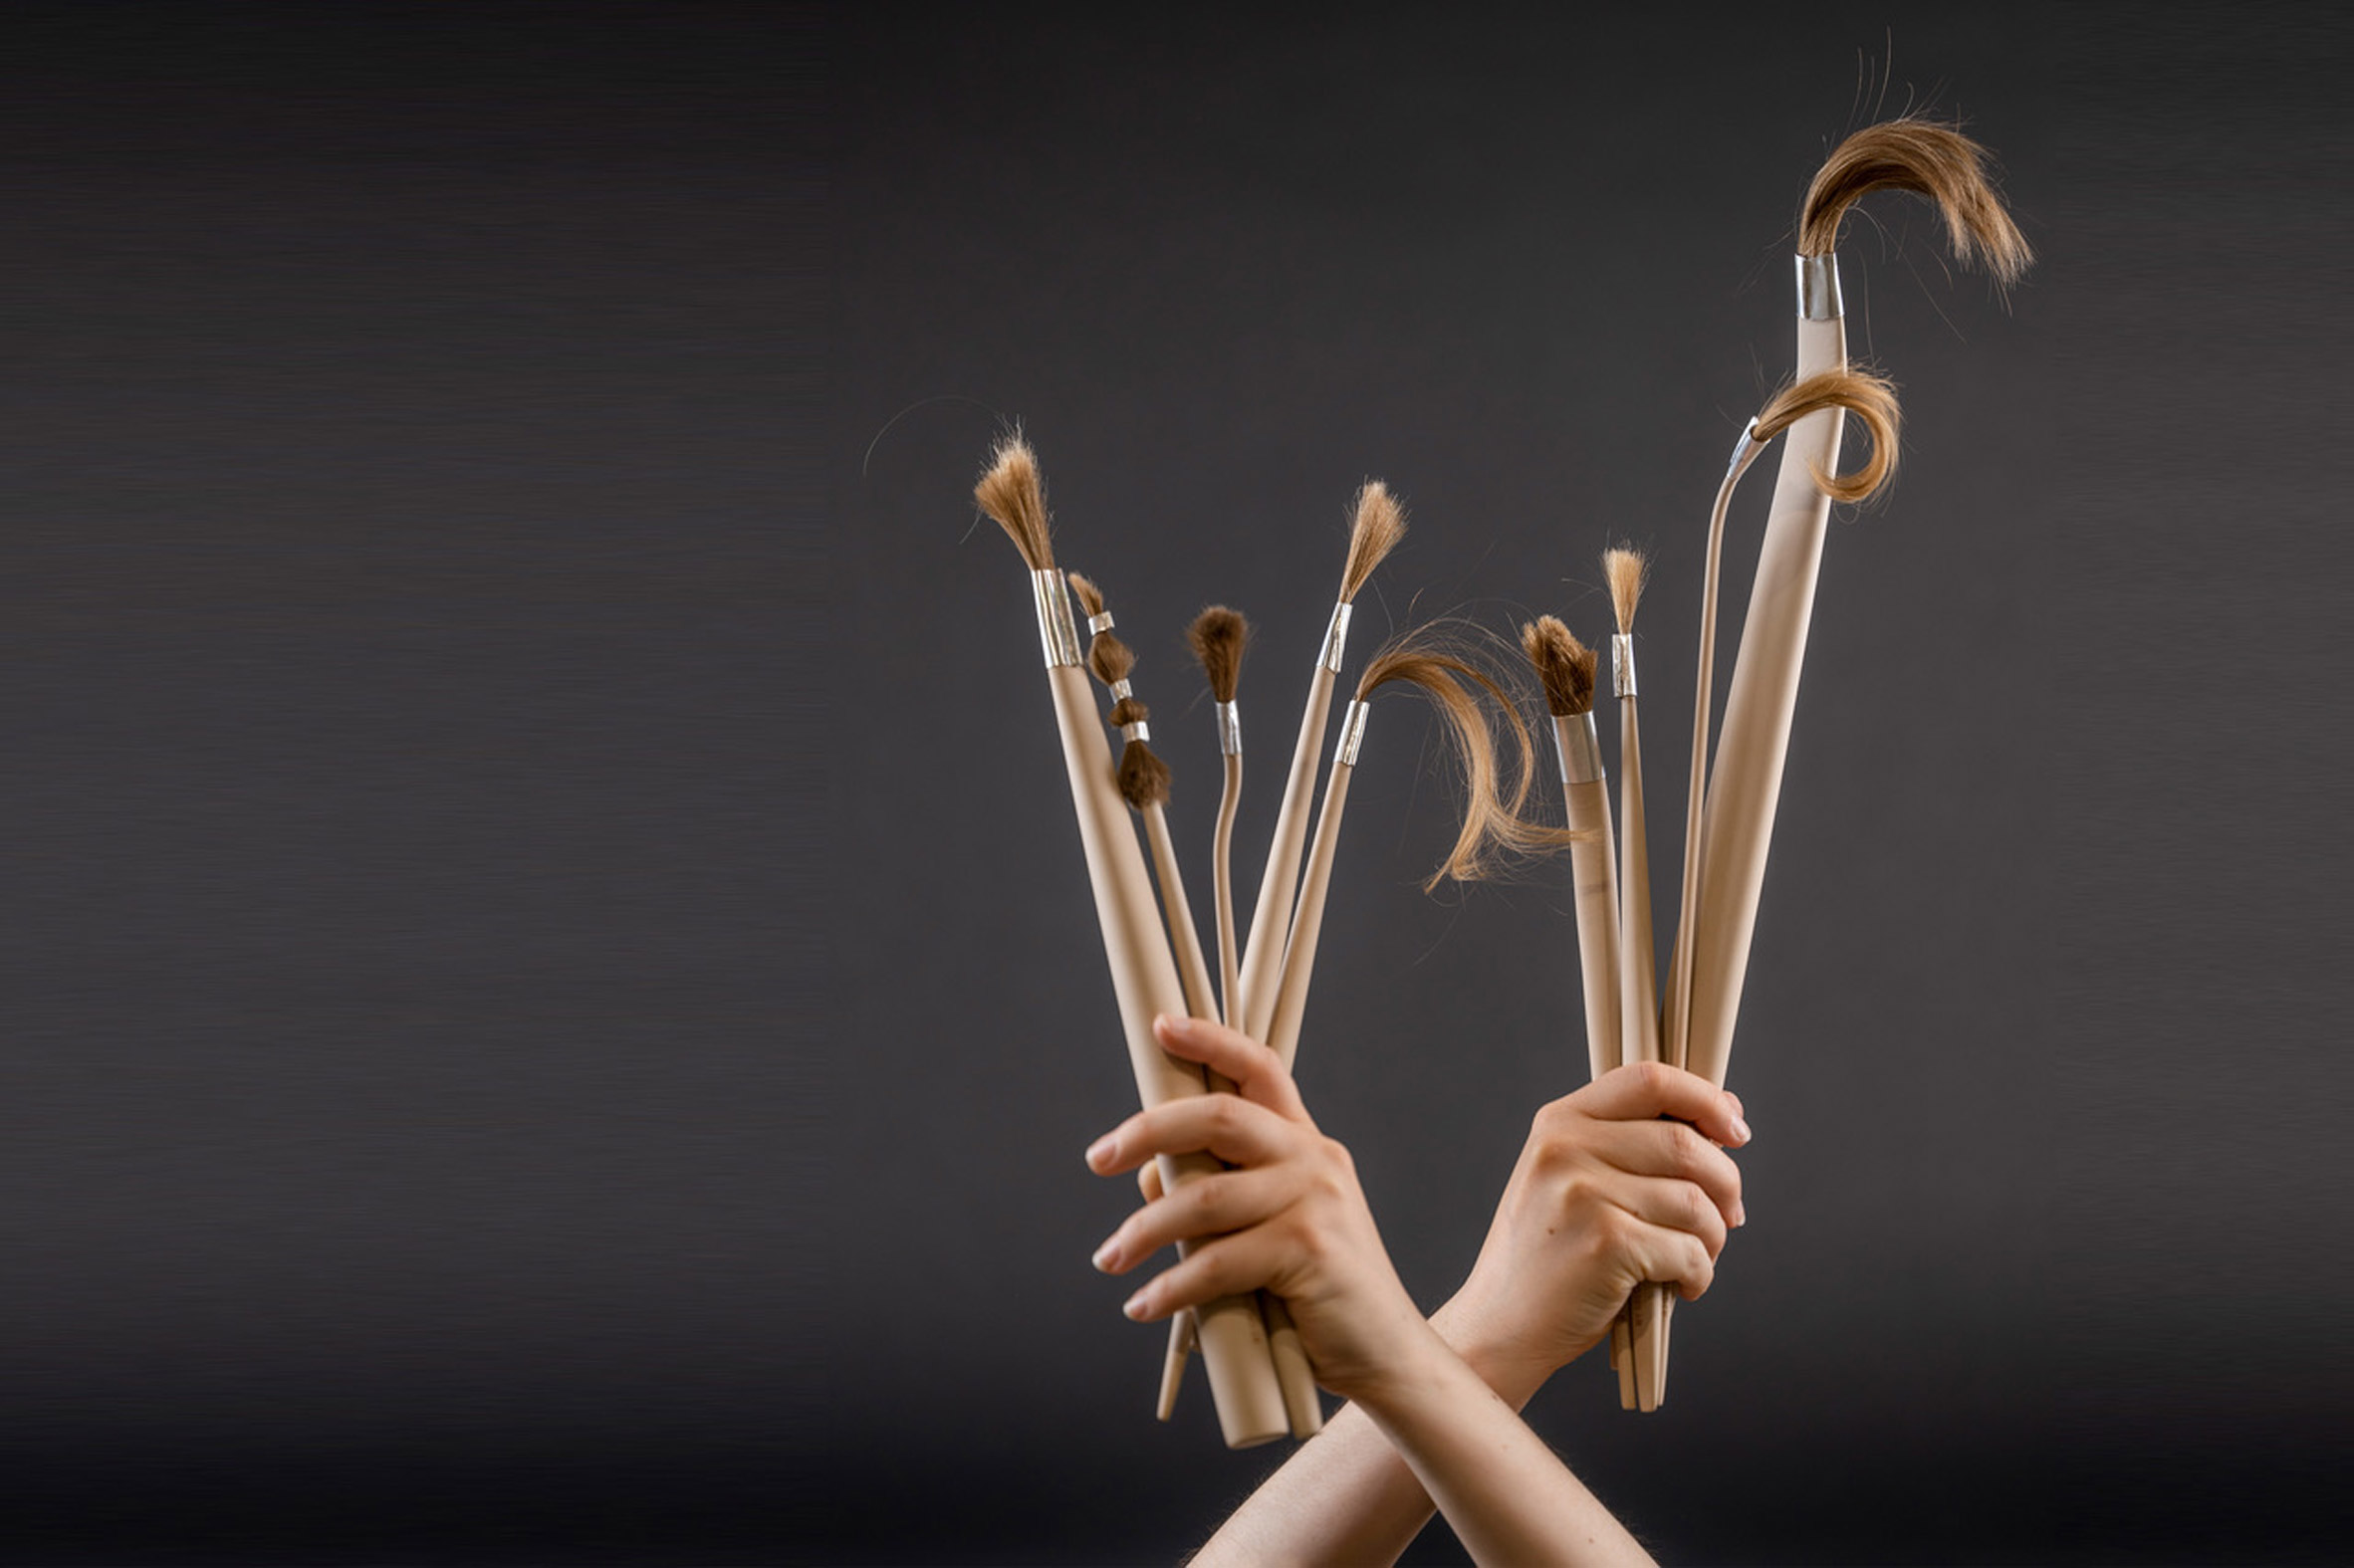 A performance object collection made from the designer's hair